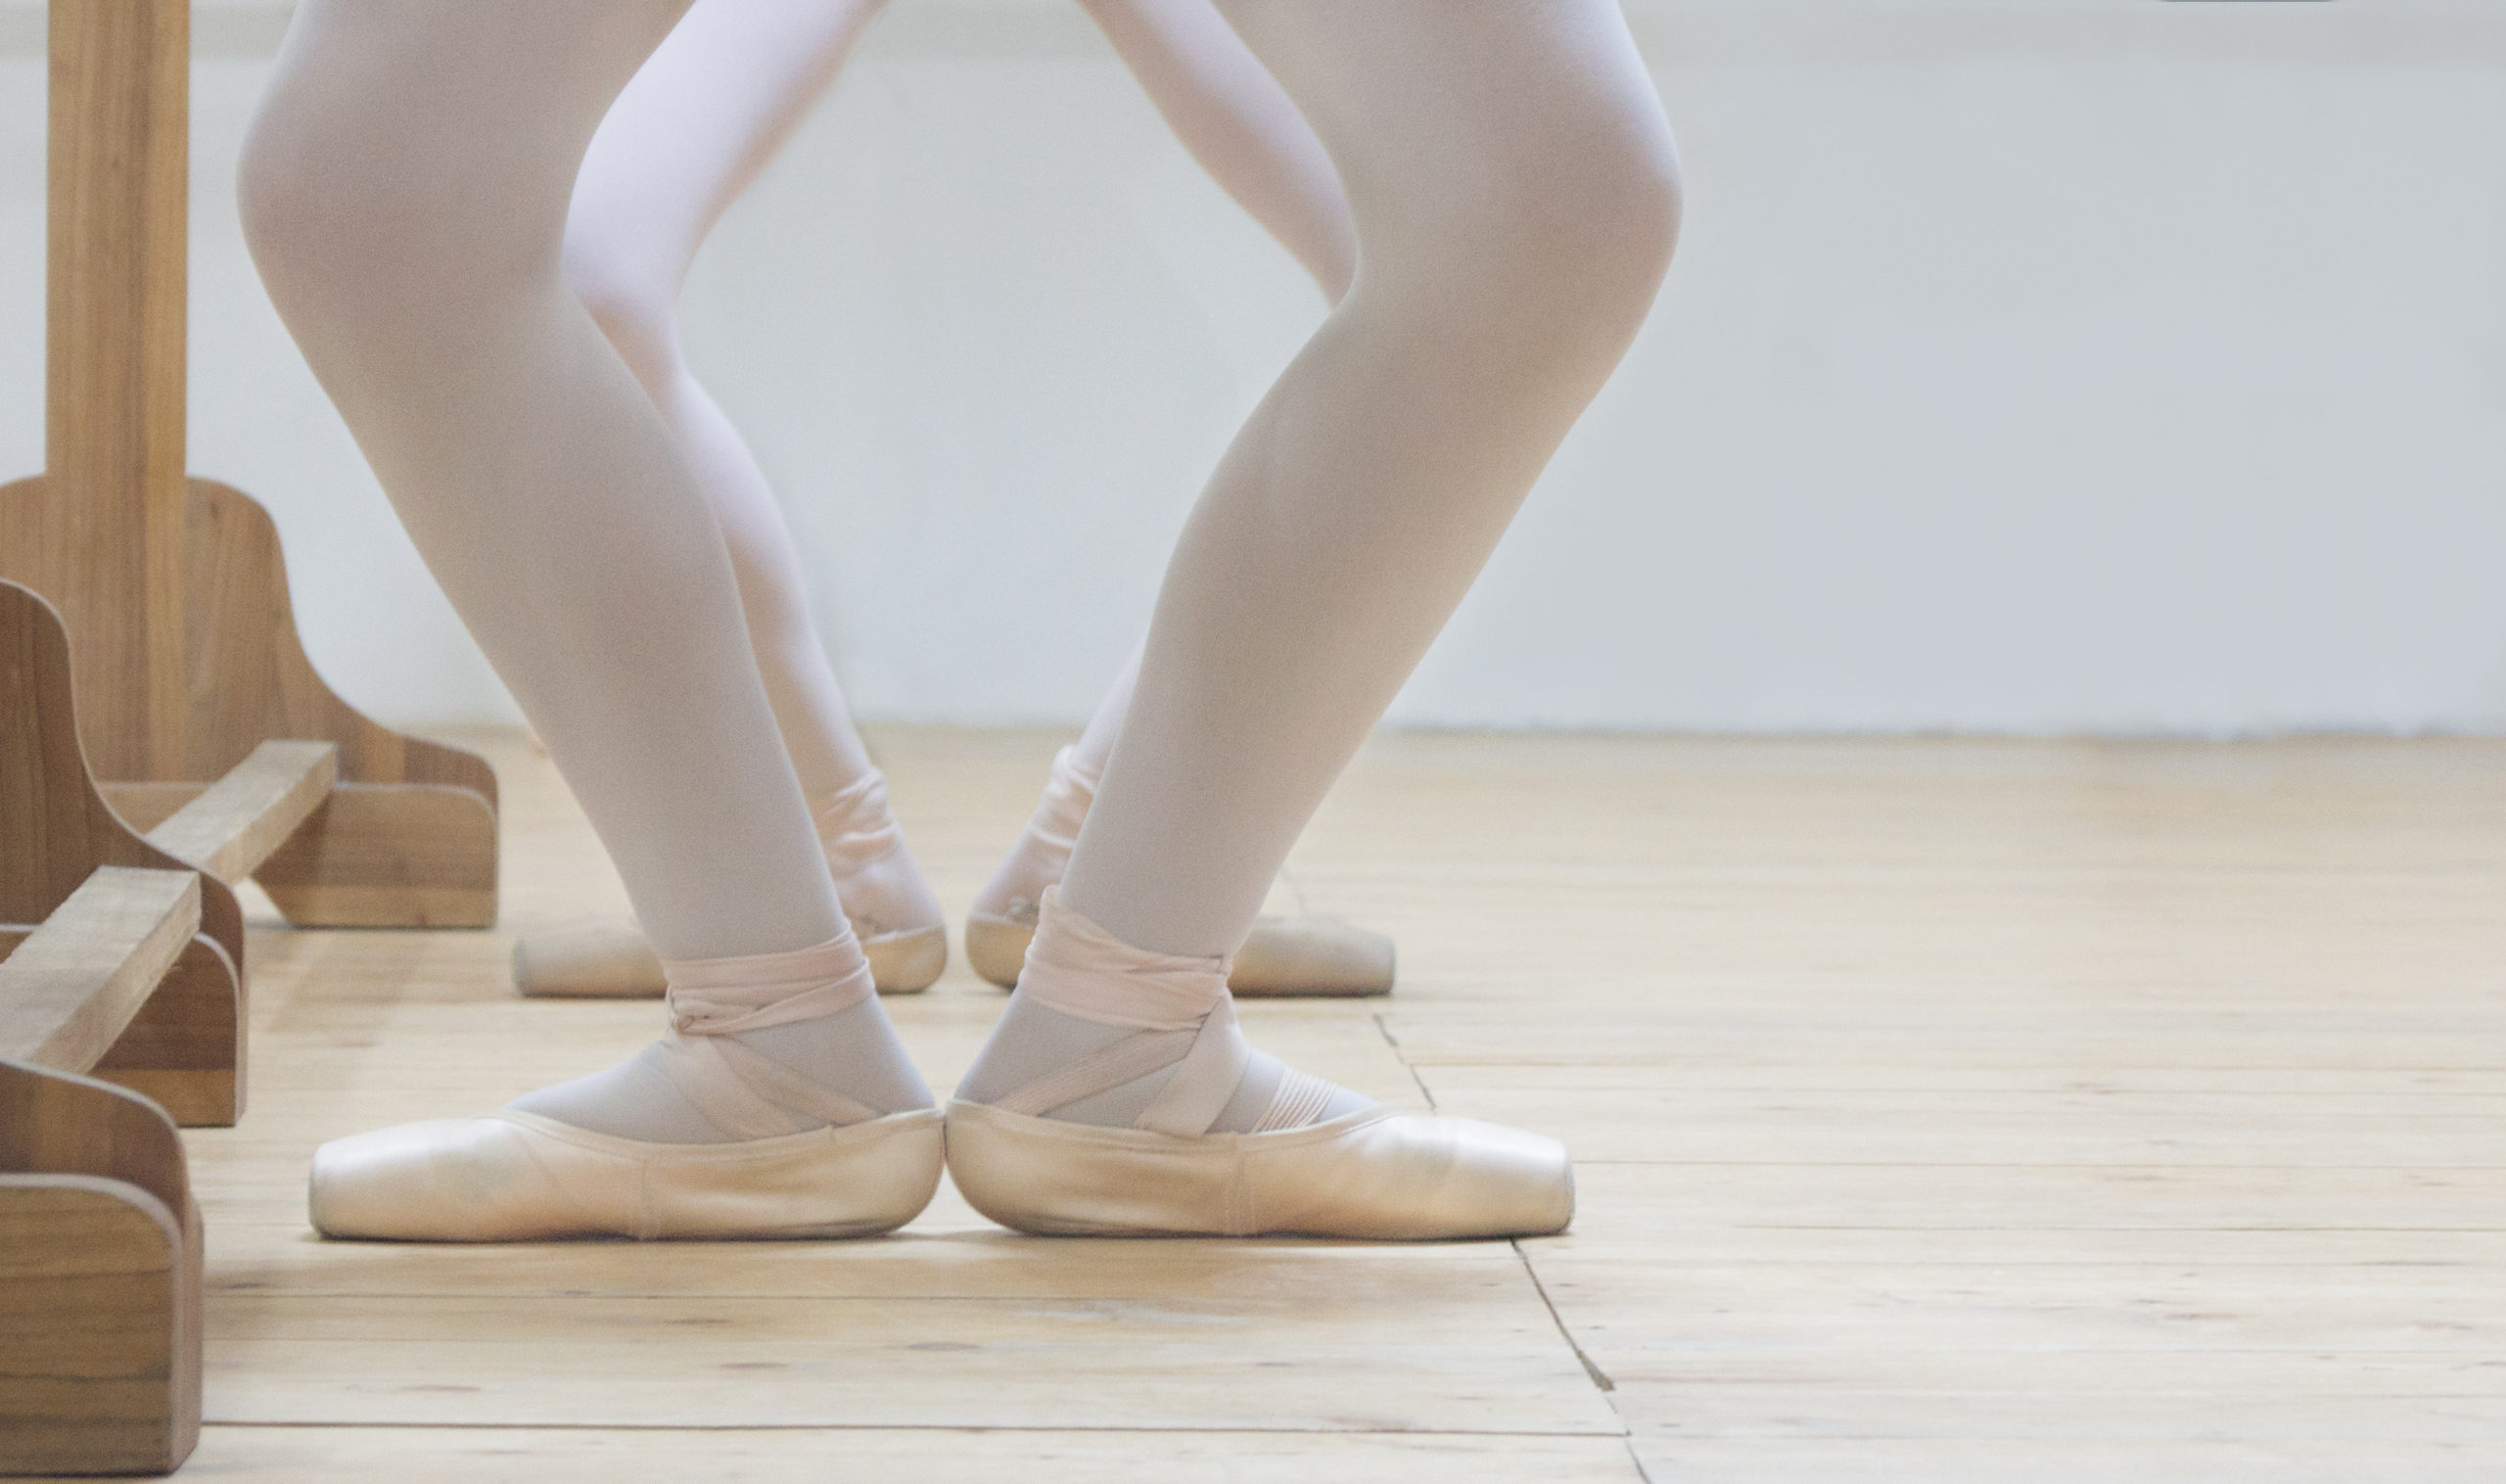 Ballet dancers feet at demi-plie positions at the barre